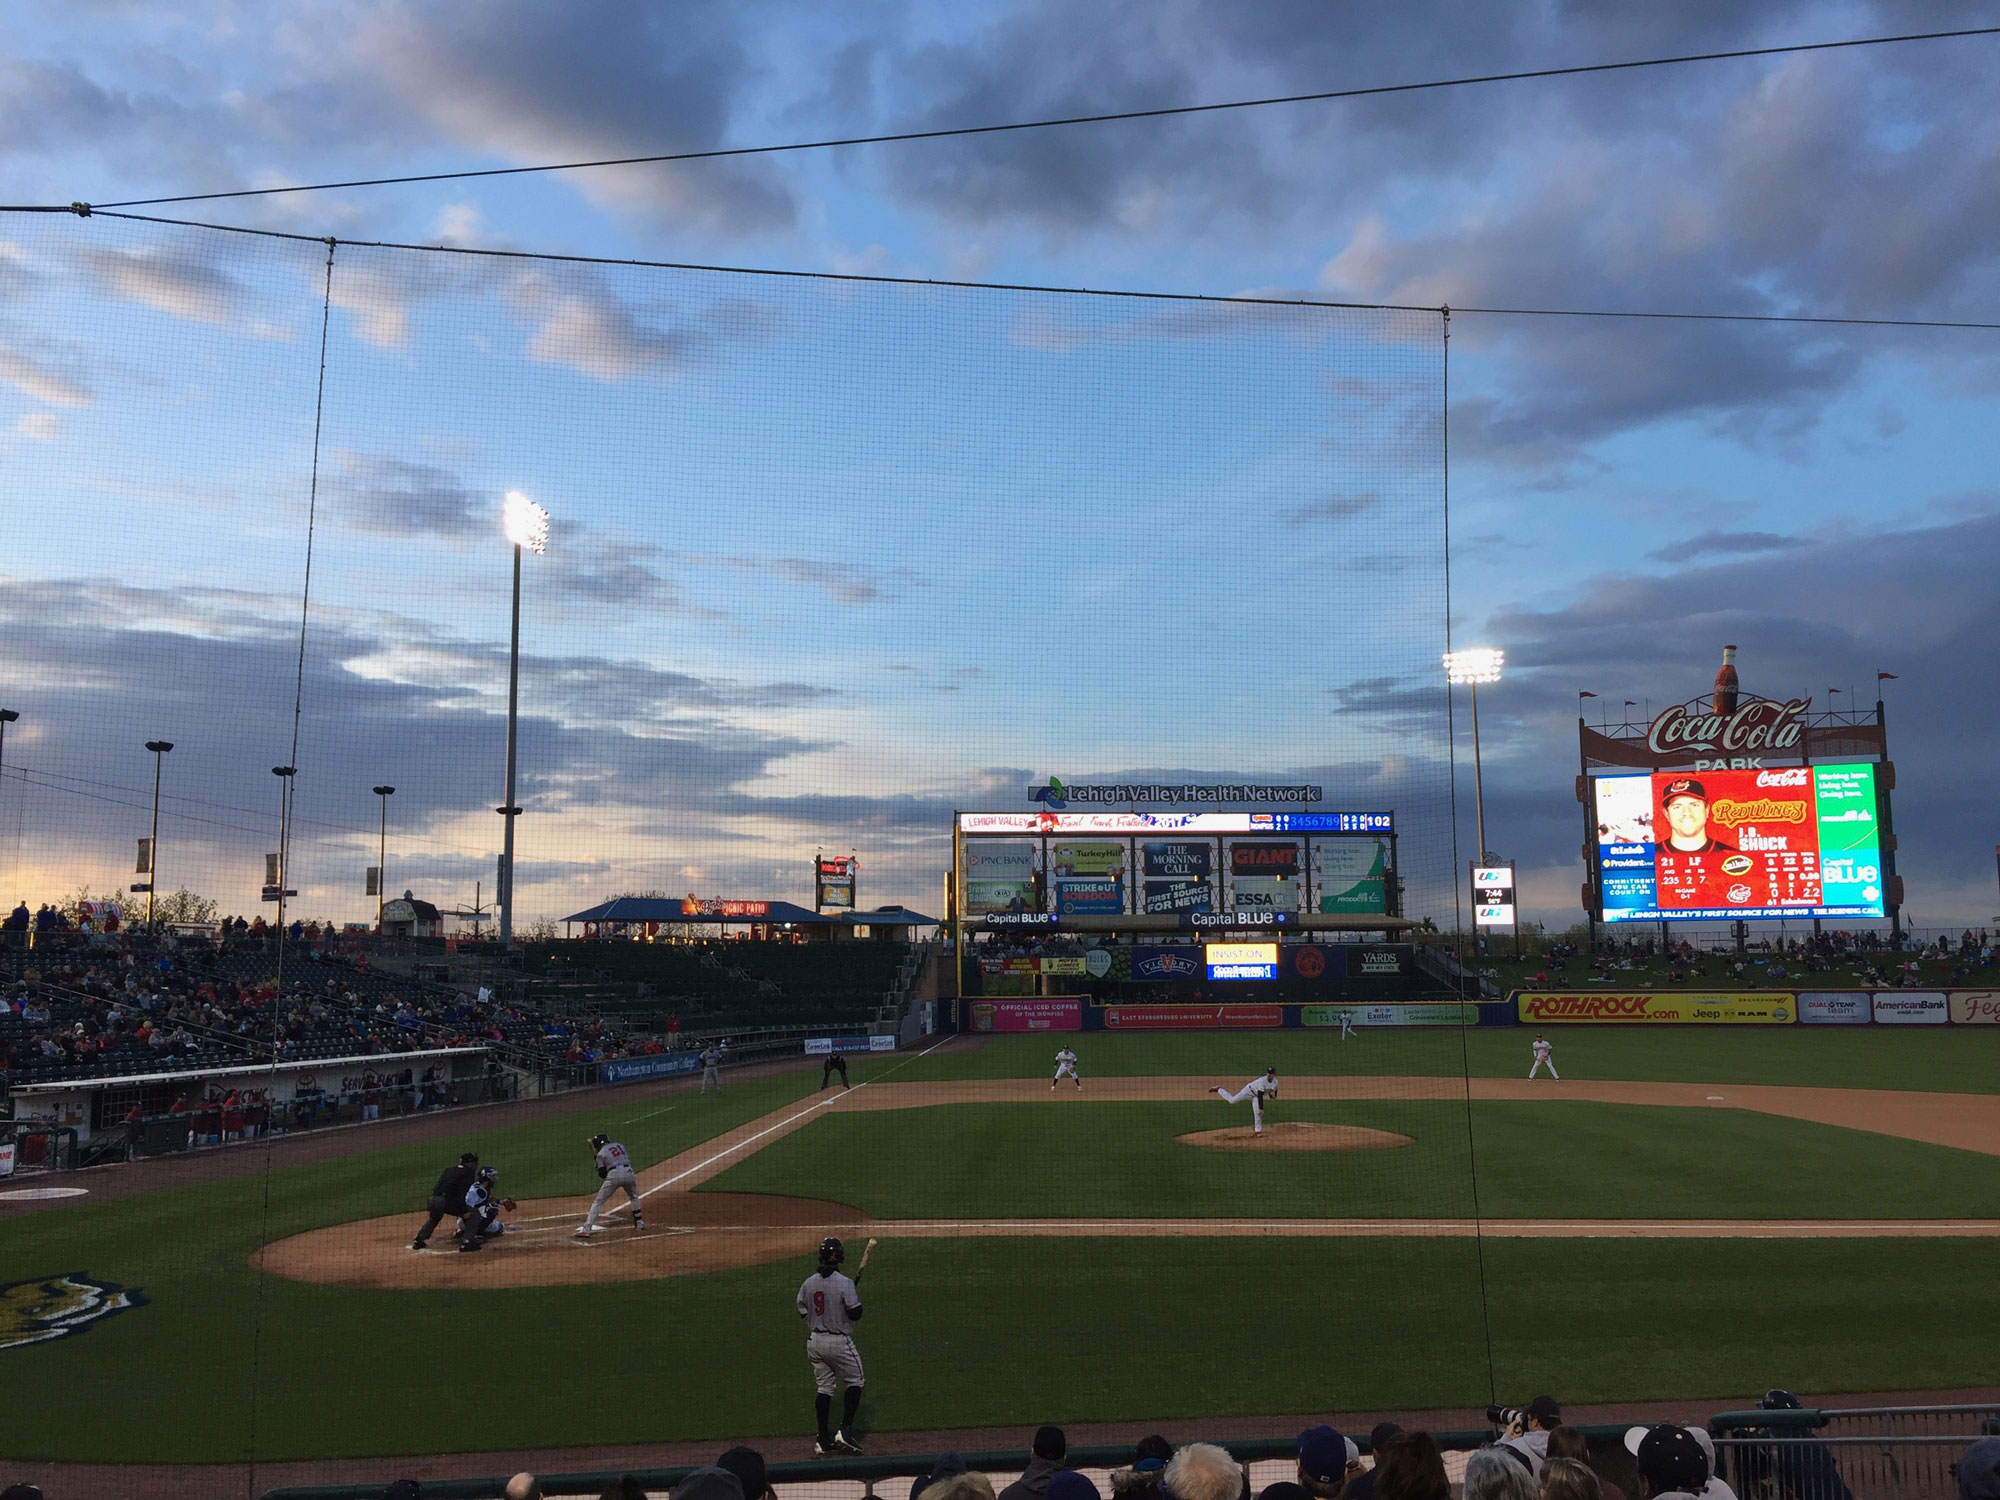 A minor league baseball park at sunset. The mostly blue sky is punctuated with clouds shading darker as the sun goes down.